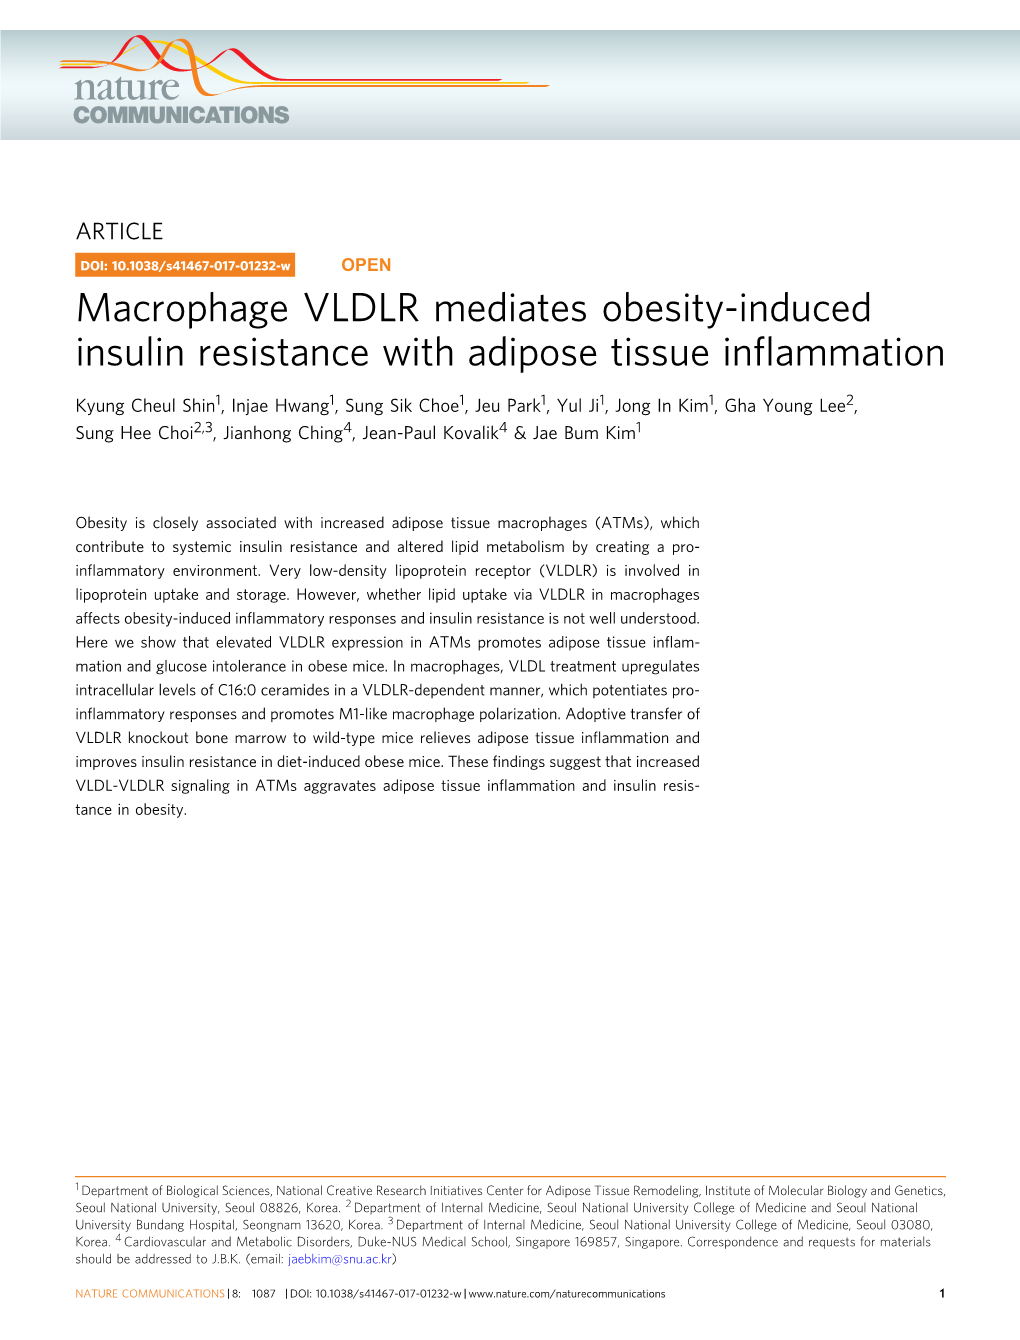 Macrophage VLDLR Mediates Obesity-Induced Insulin Resistance with Adipose Tissue Inﬂammation